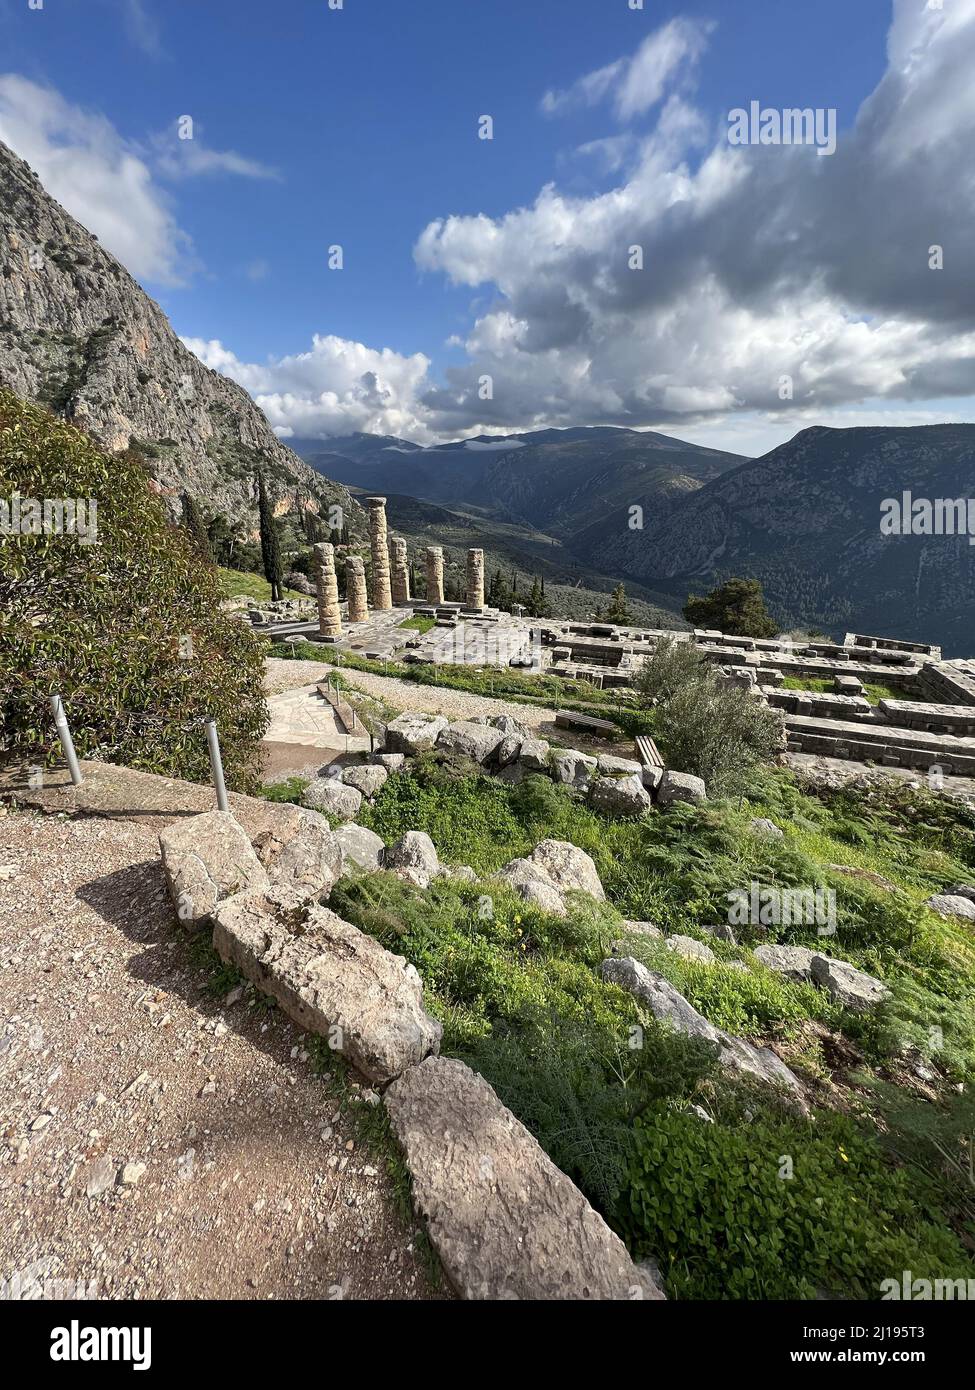 A vertical shot of the ancient Delphi in Greece. Stock Photo